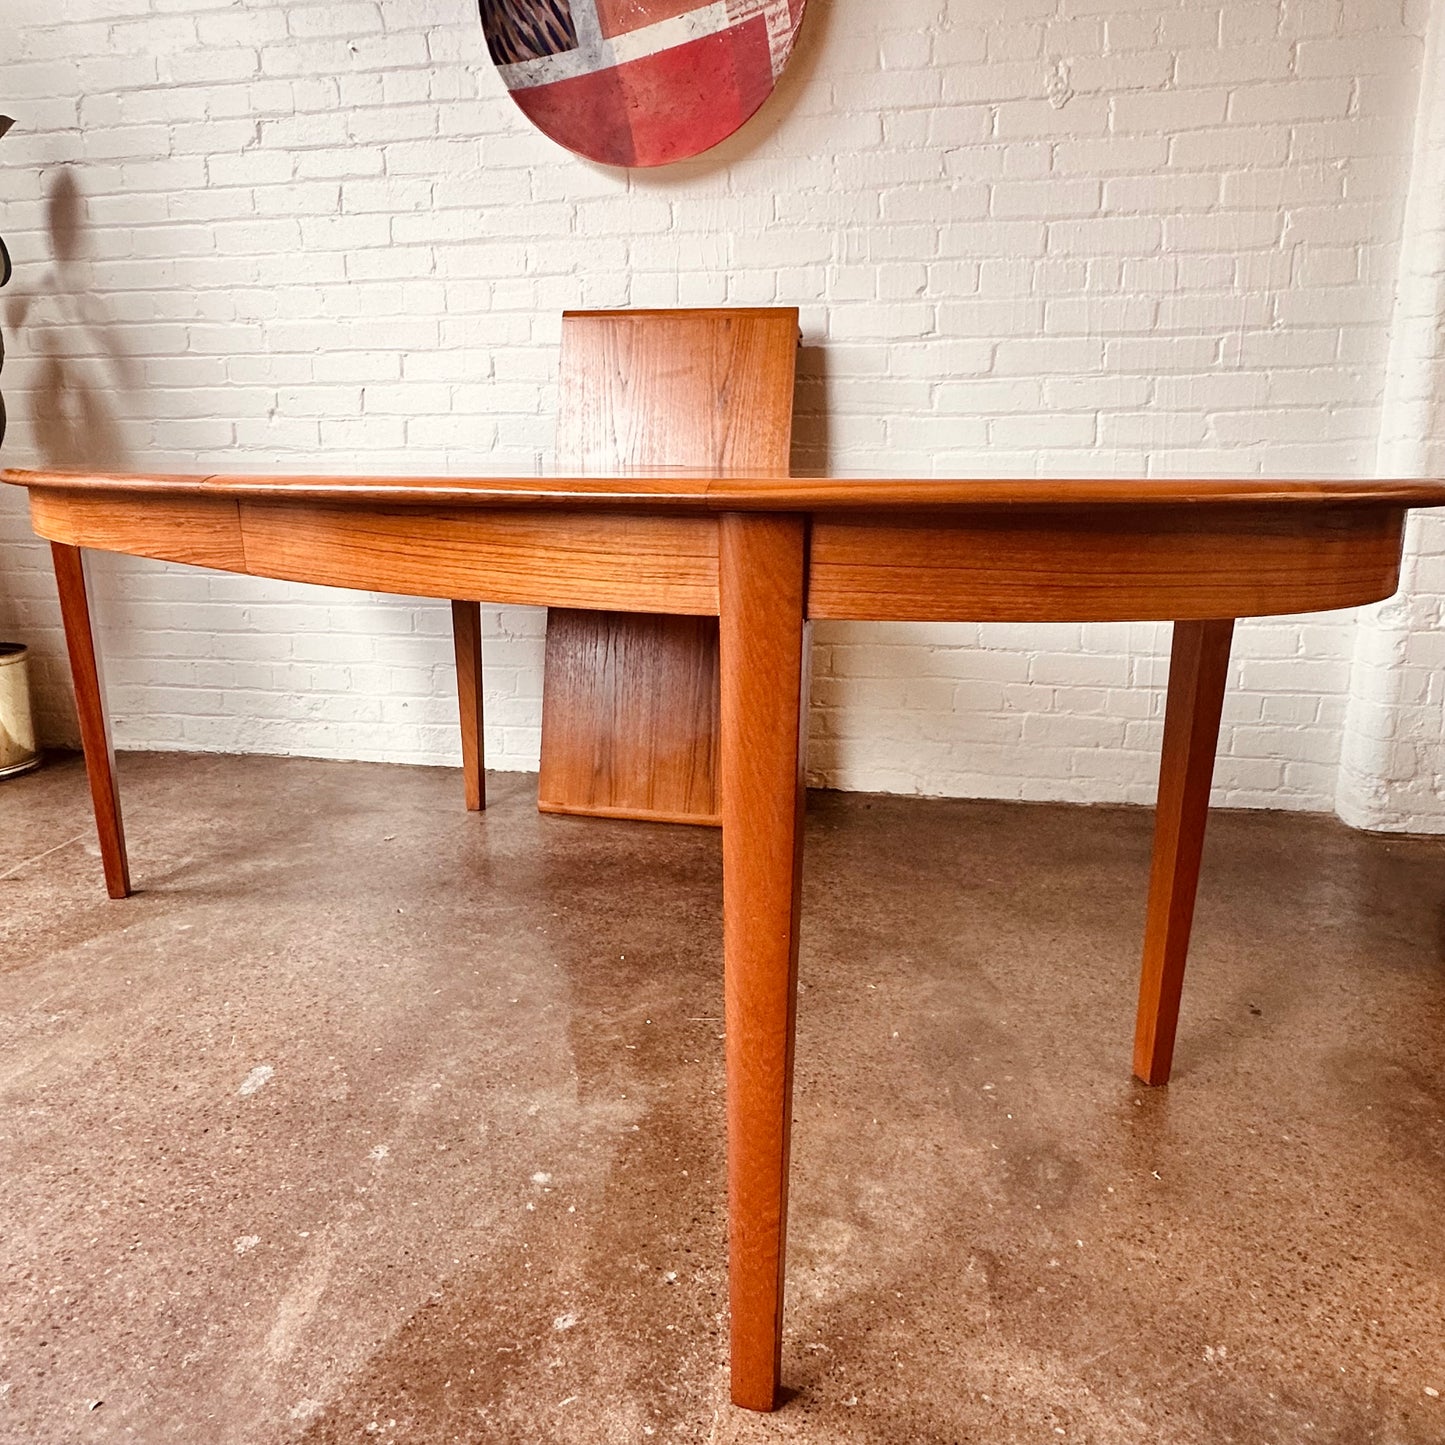 DANISH MODERN OVAL DINING TABLE WITH TWO LEAVES